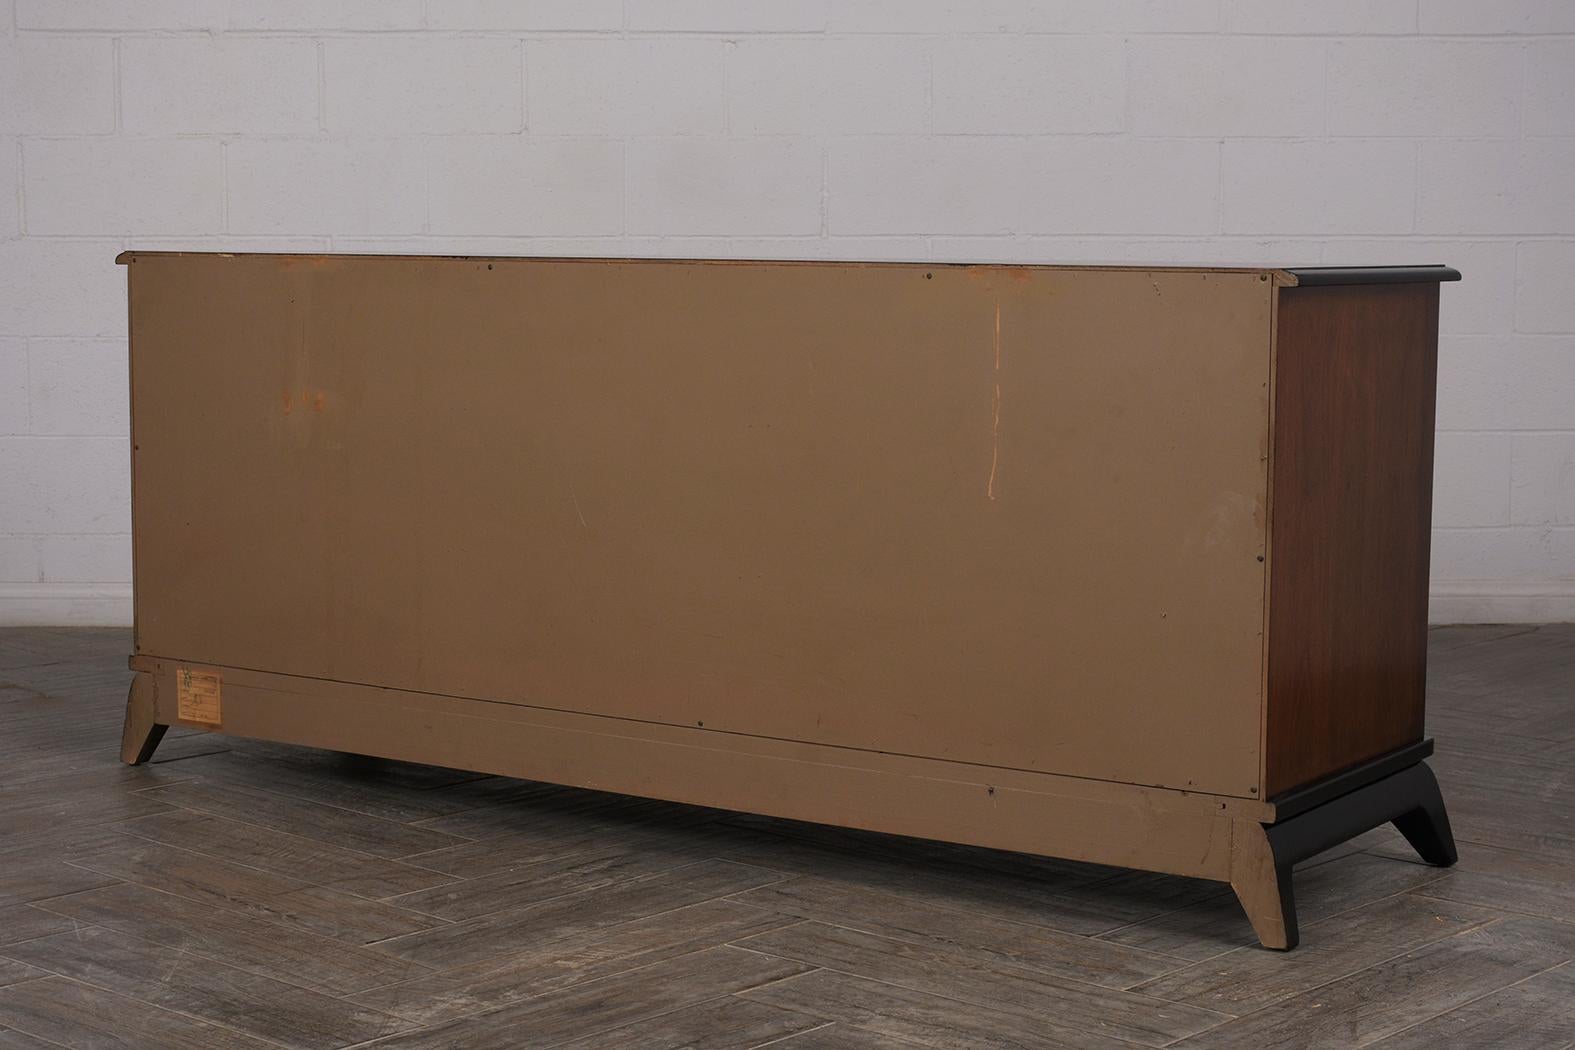 A 1960s Mid-Century Modern lacquered sideboard painted in a black and brown finish. The sideboard has useful drawers and doors for proper storage.